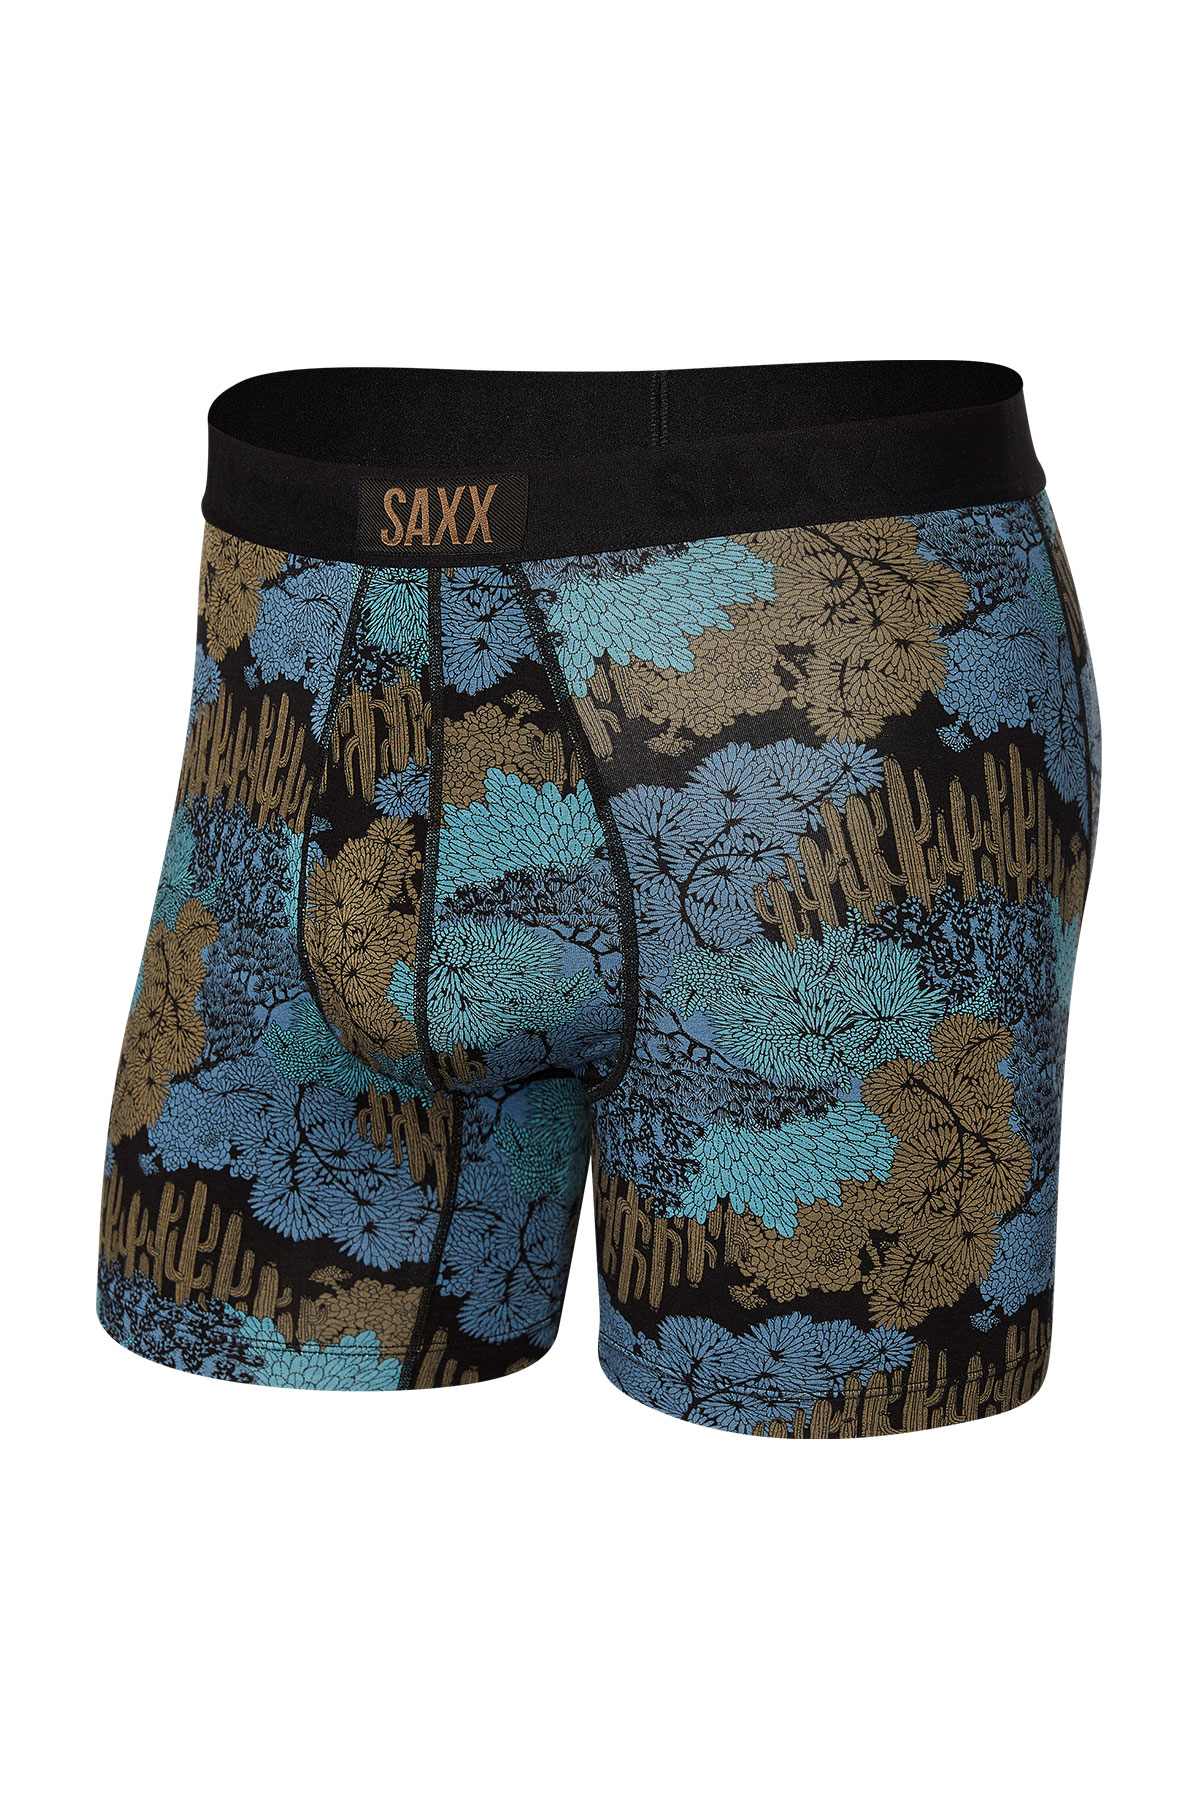 Saxx Underwear Men's Boxer Briefs- Ultra Boxer Briefs with Fly and Built-in  Ballpark Pouch Support – Underwear for Men,Black,Large